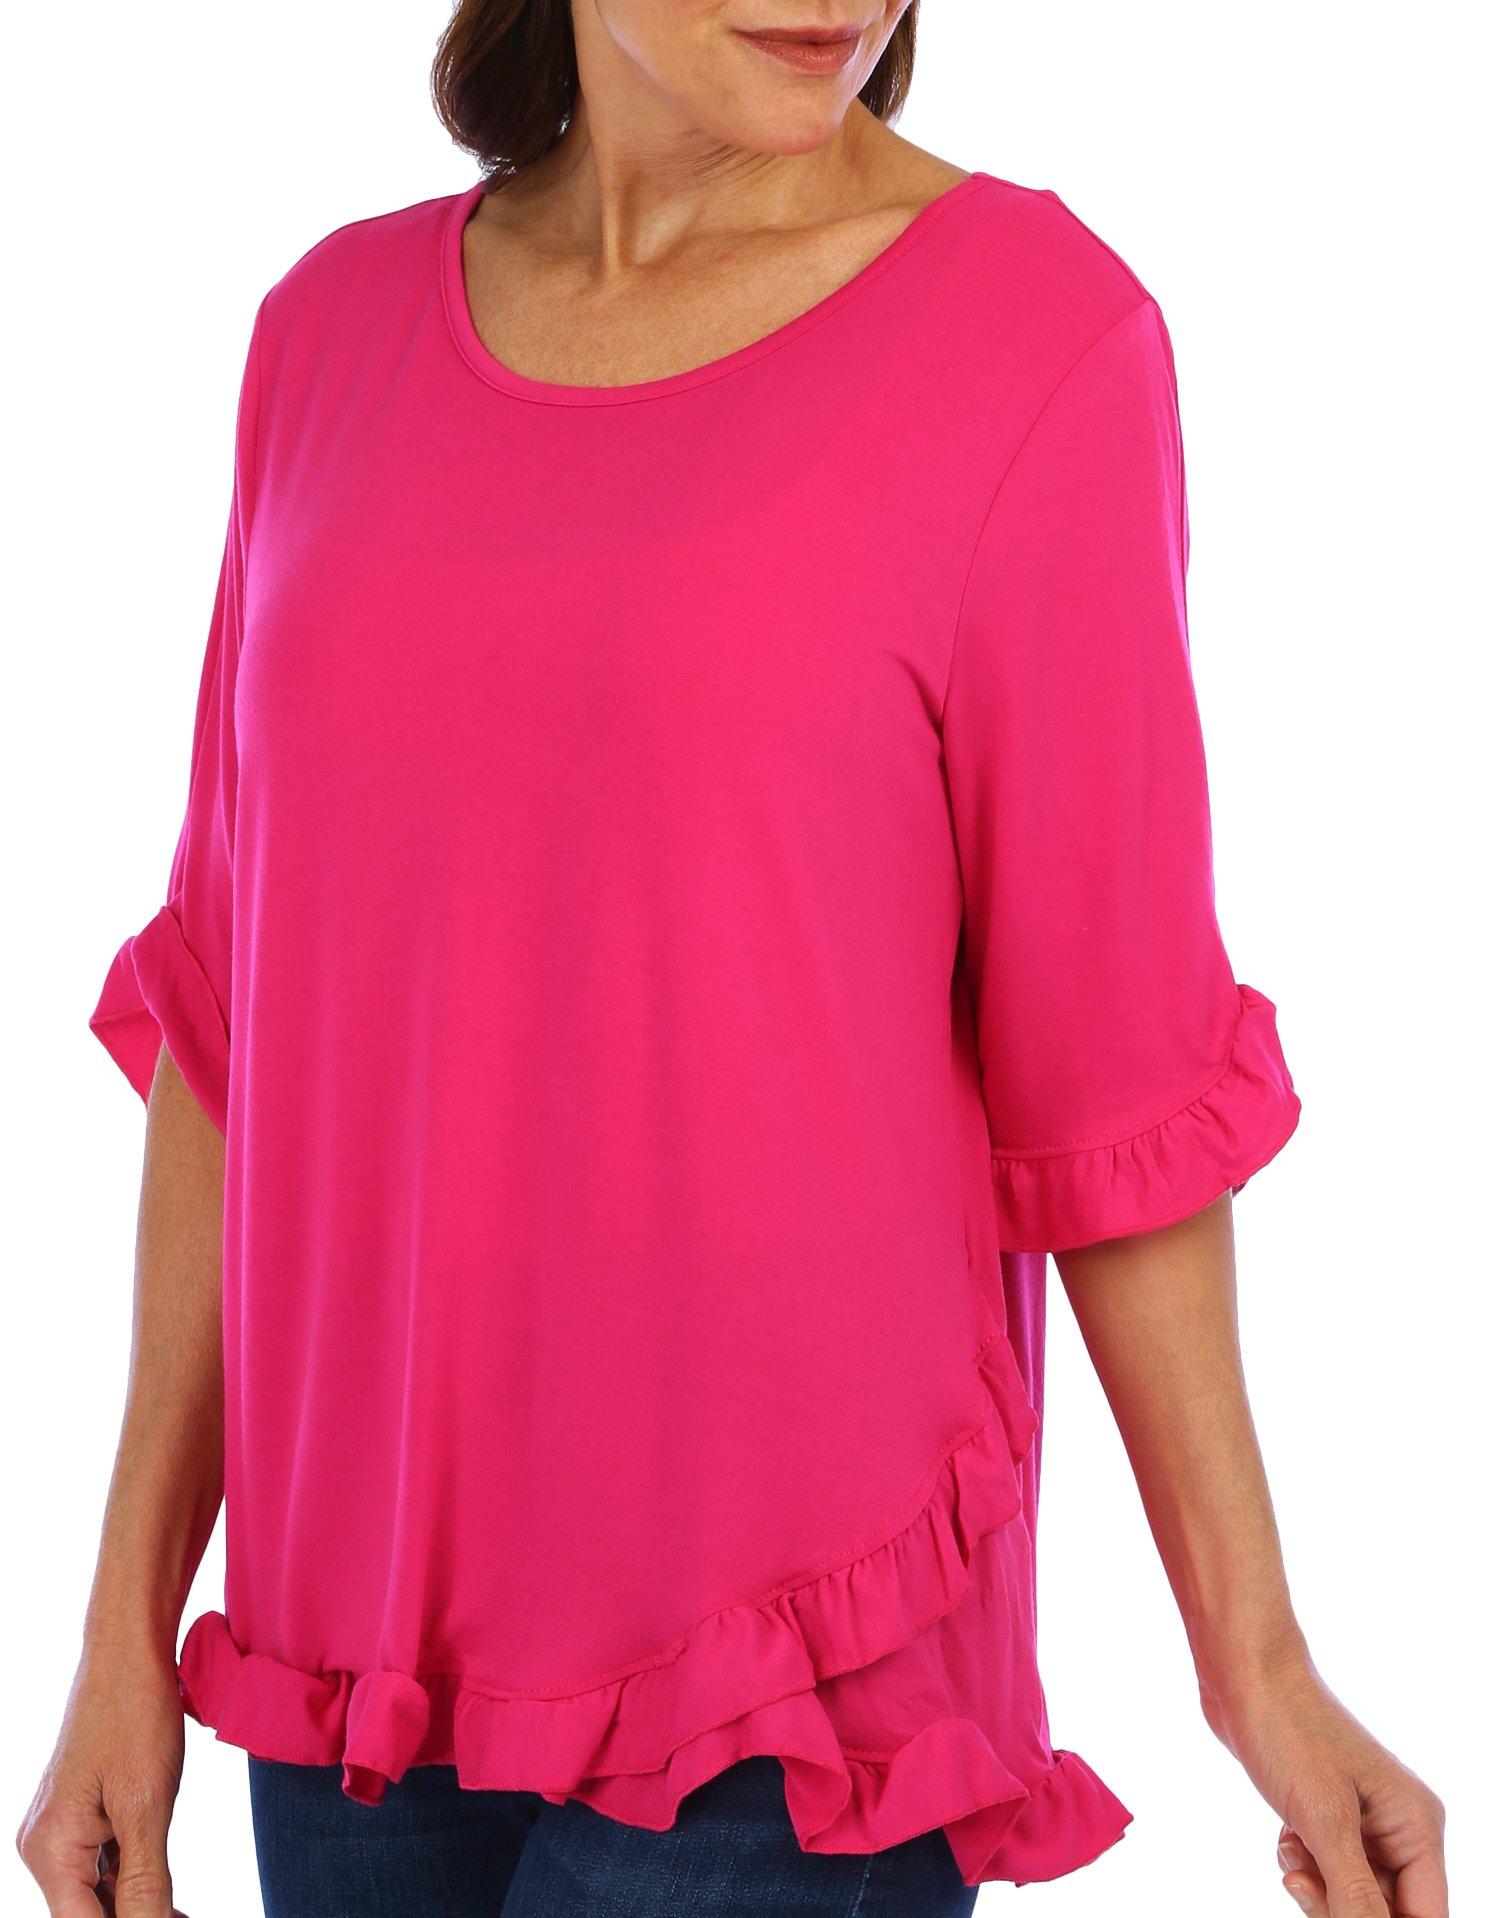 Womens Solid Ruffled Elbow Short Sleeve Top